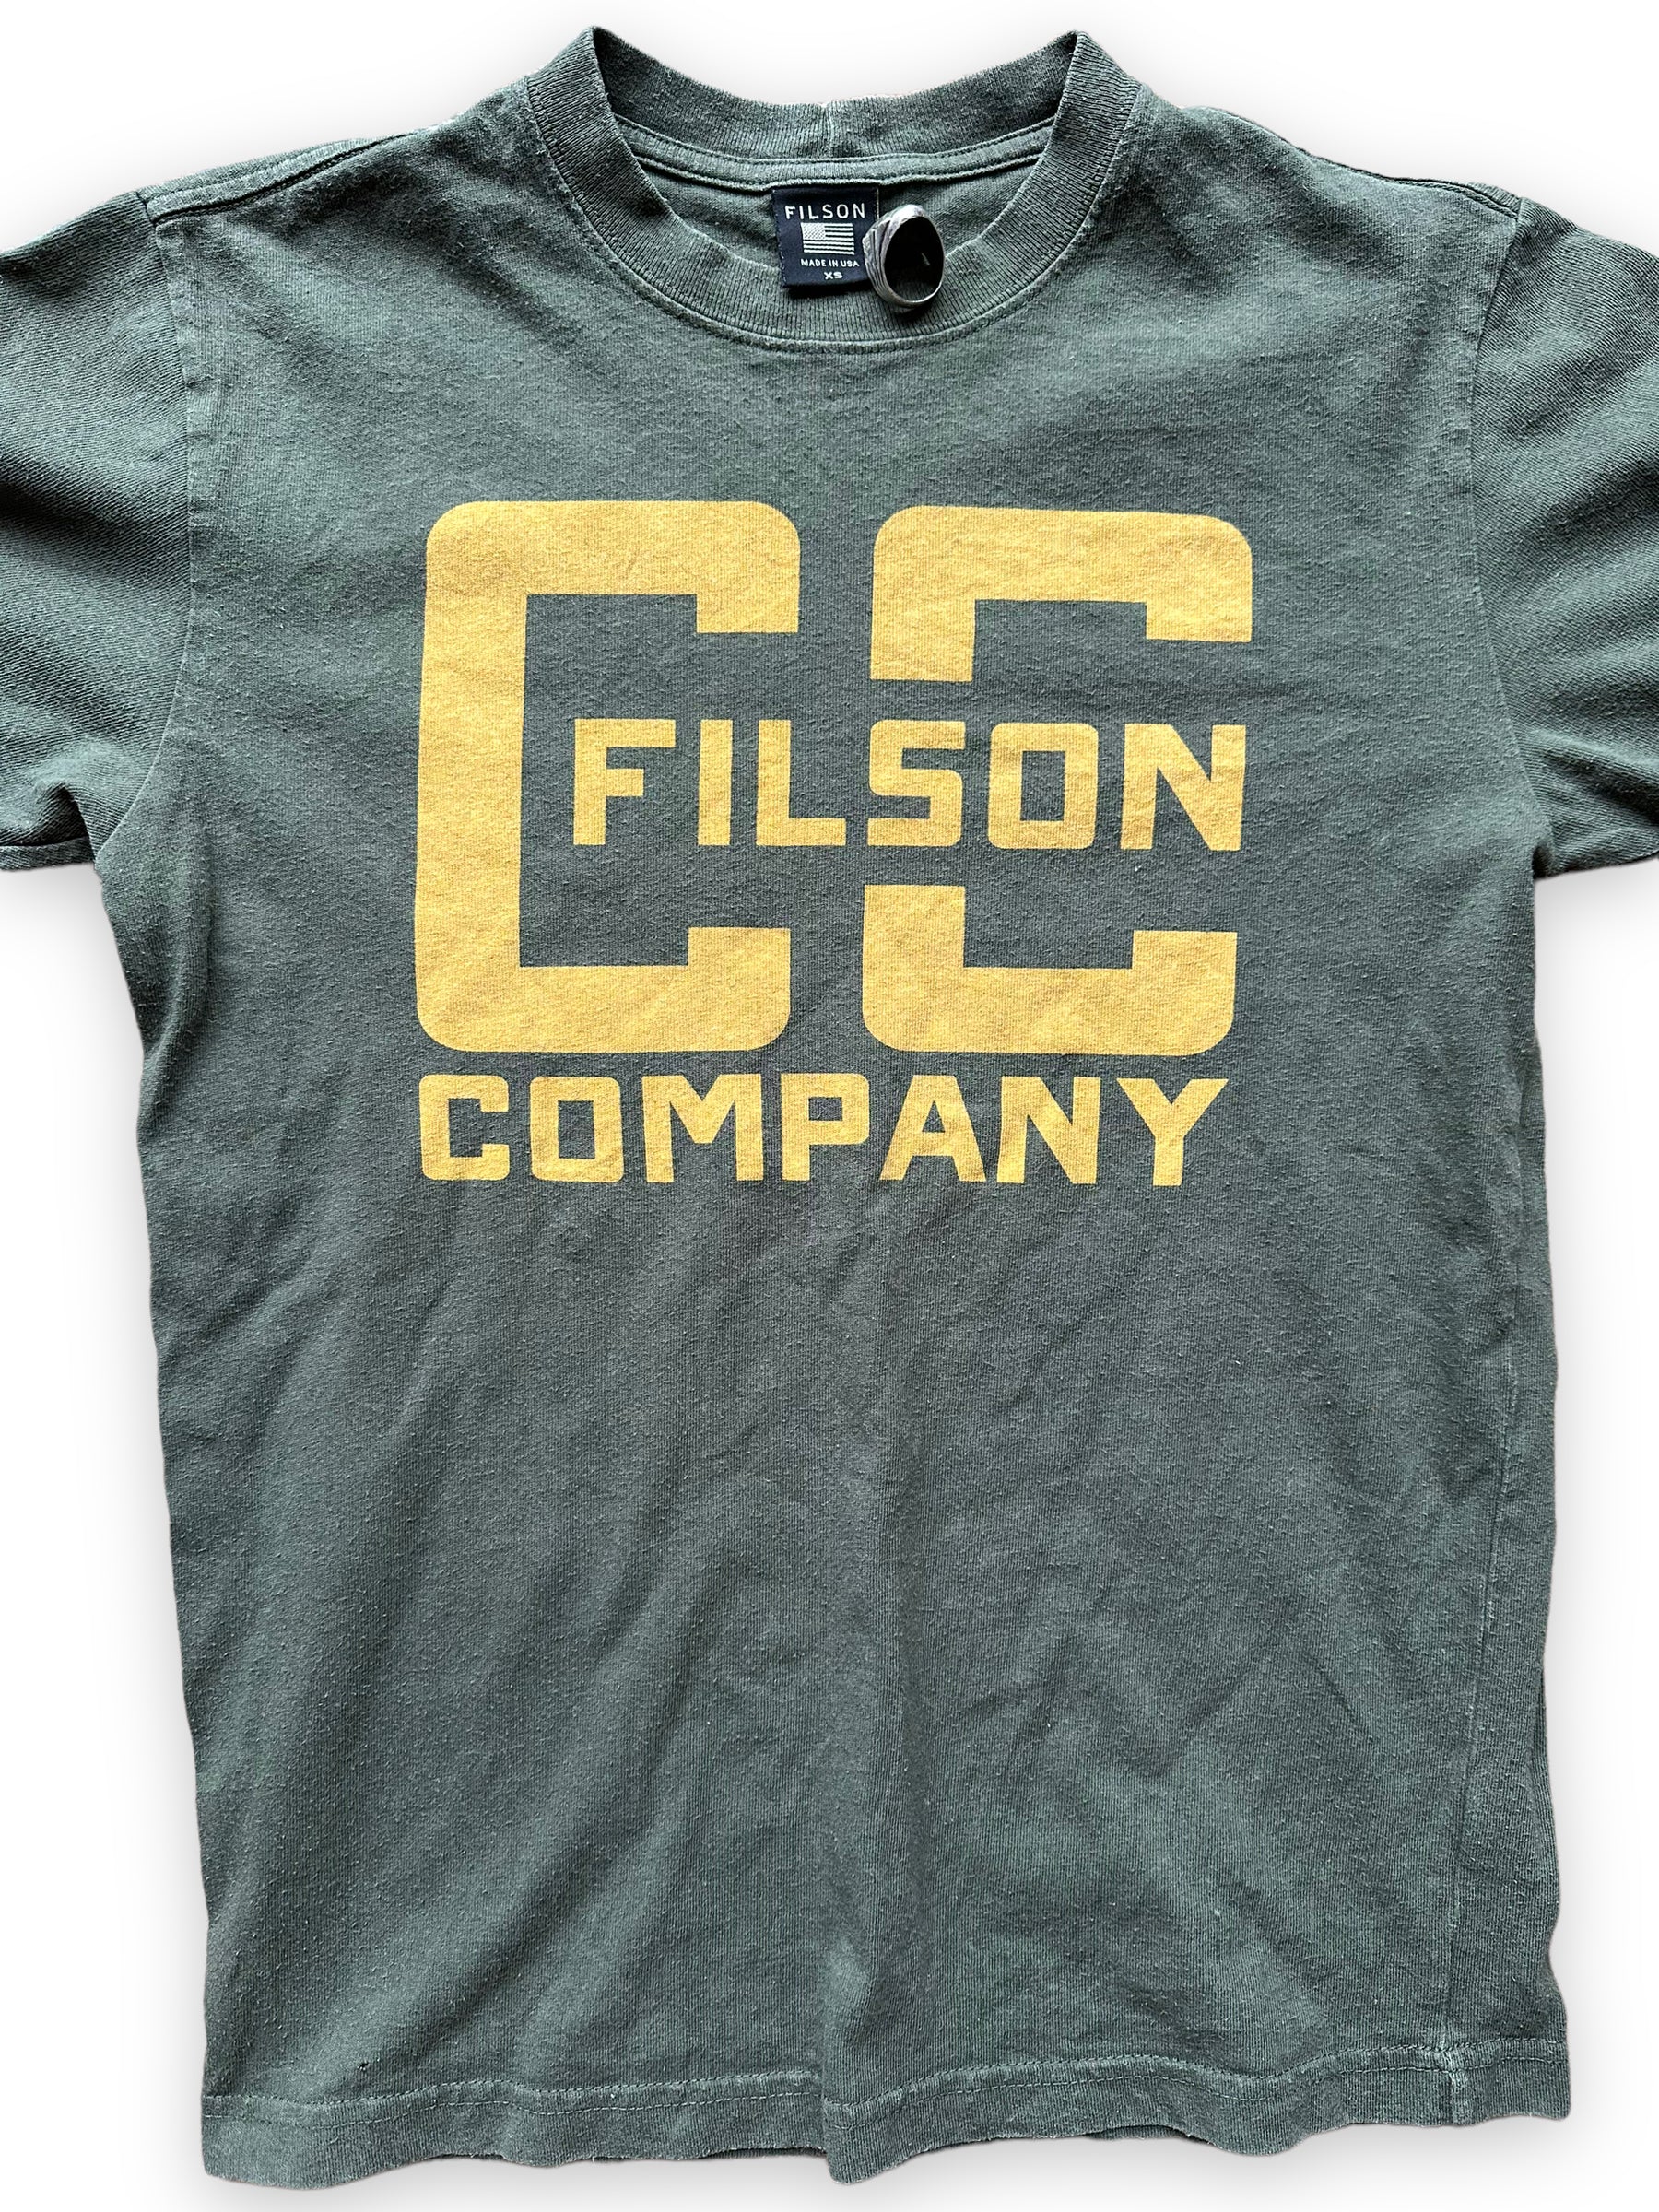 Front Detail on Olive Green Filson Cotton Tee SZ XS  |  Barn Owl Vintage Goods | Filson Graphic Tees Seattle